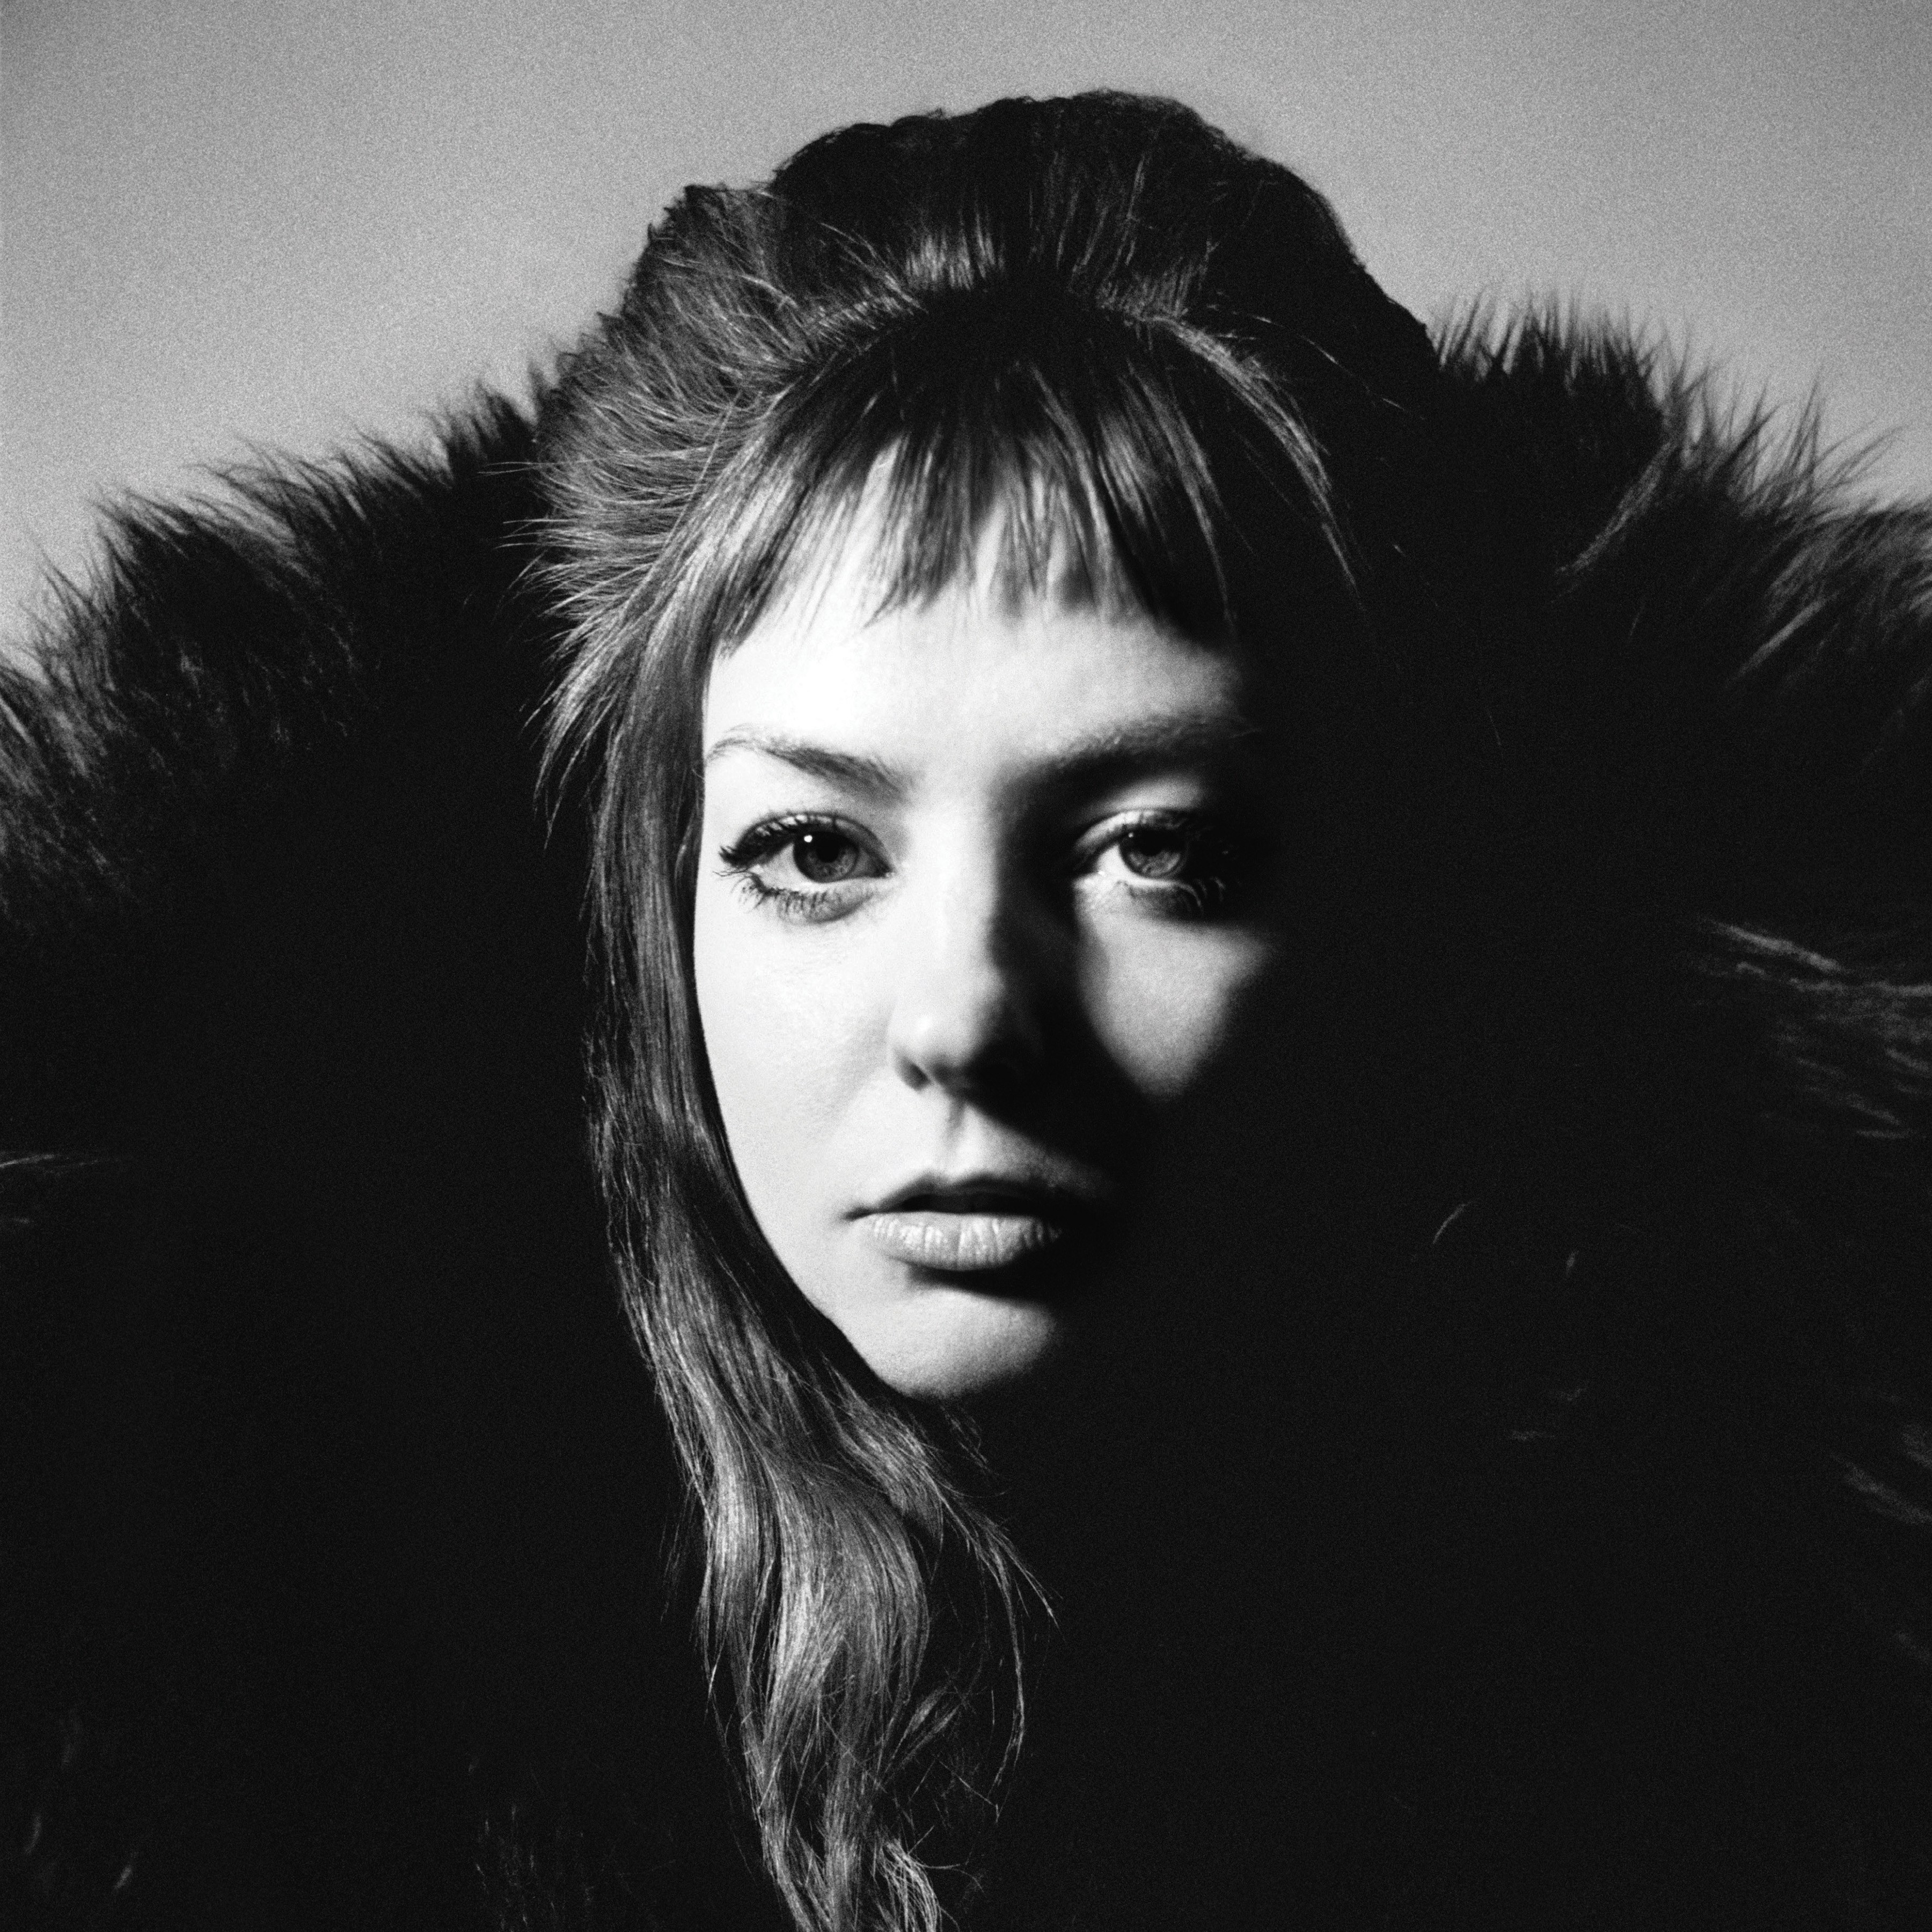 Angel Olsen Announces New Album <i>All Mirrors</i>, Releases Video for Title Track” title=”All Mirrors” data-original-id=”336787″ data-adjusted-id=”336787″ class=”sm_size_full_width sm_alignment_center ” data-image-use=”multiple_use” /></p>
</p></p>    <div class=